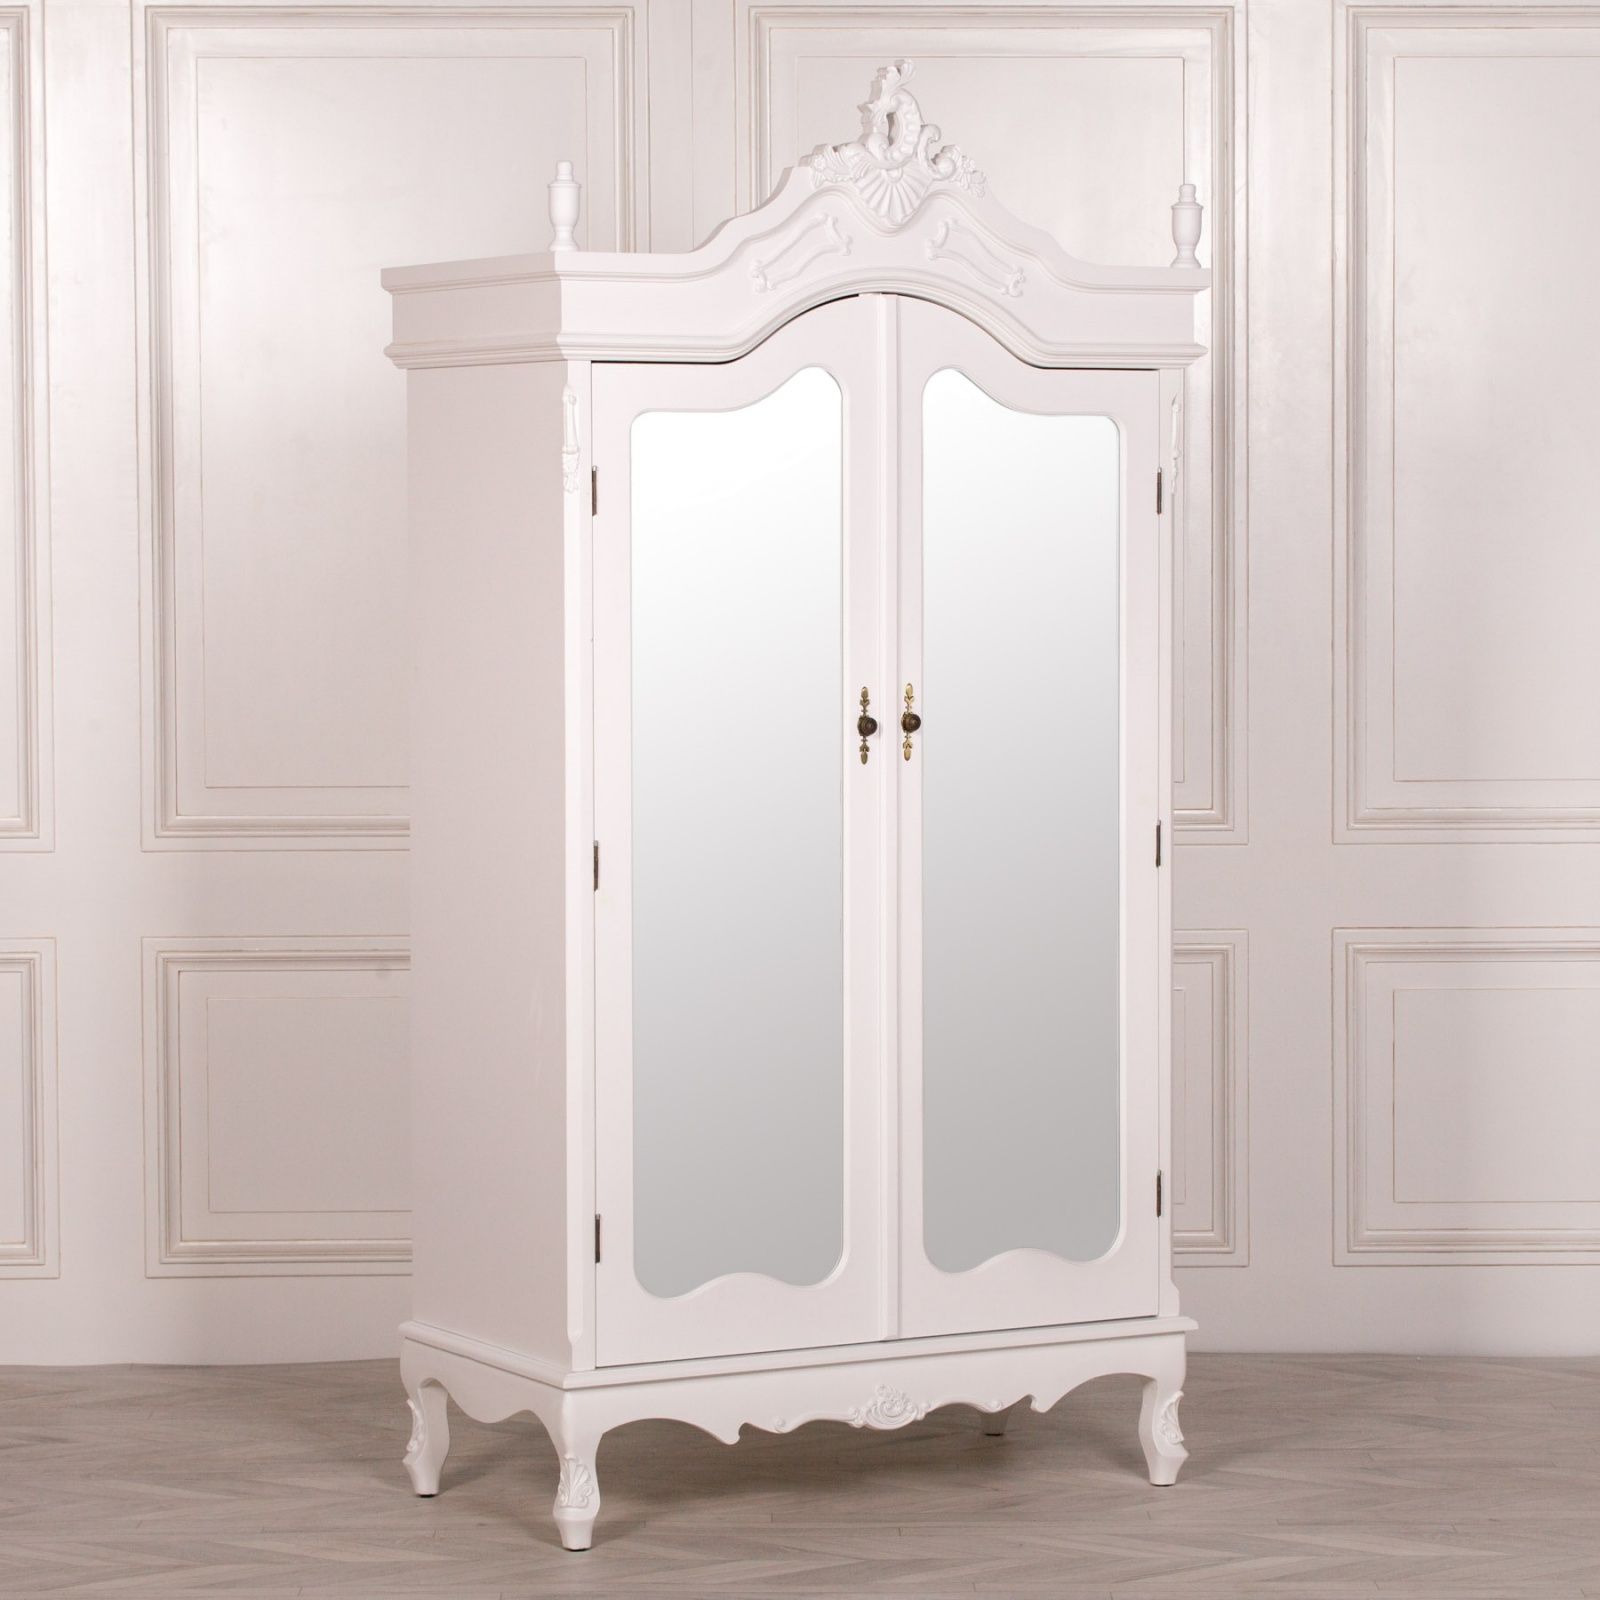 French Style Wardrobe White Mirrored Double Armoire Within French Wardrobes For Sale (View 4 of 15)